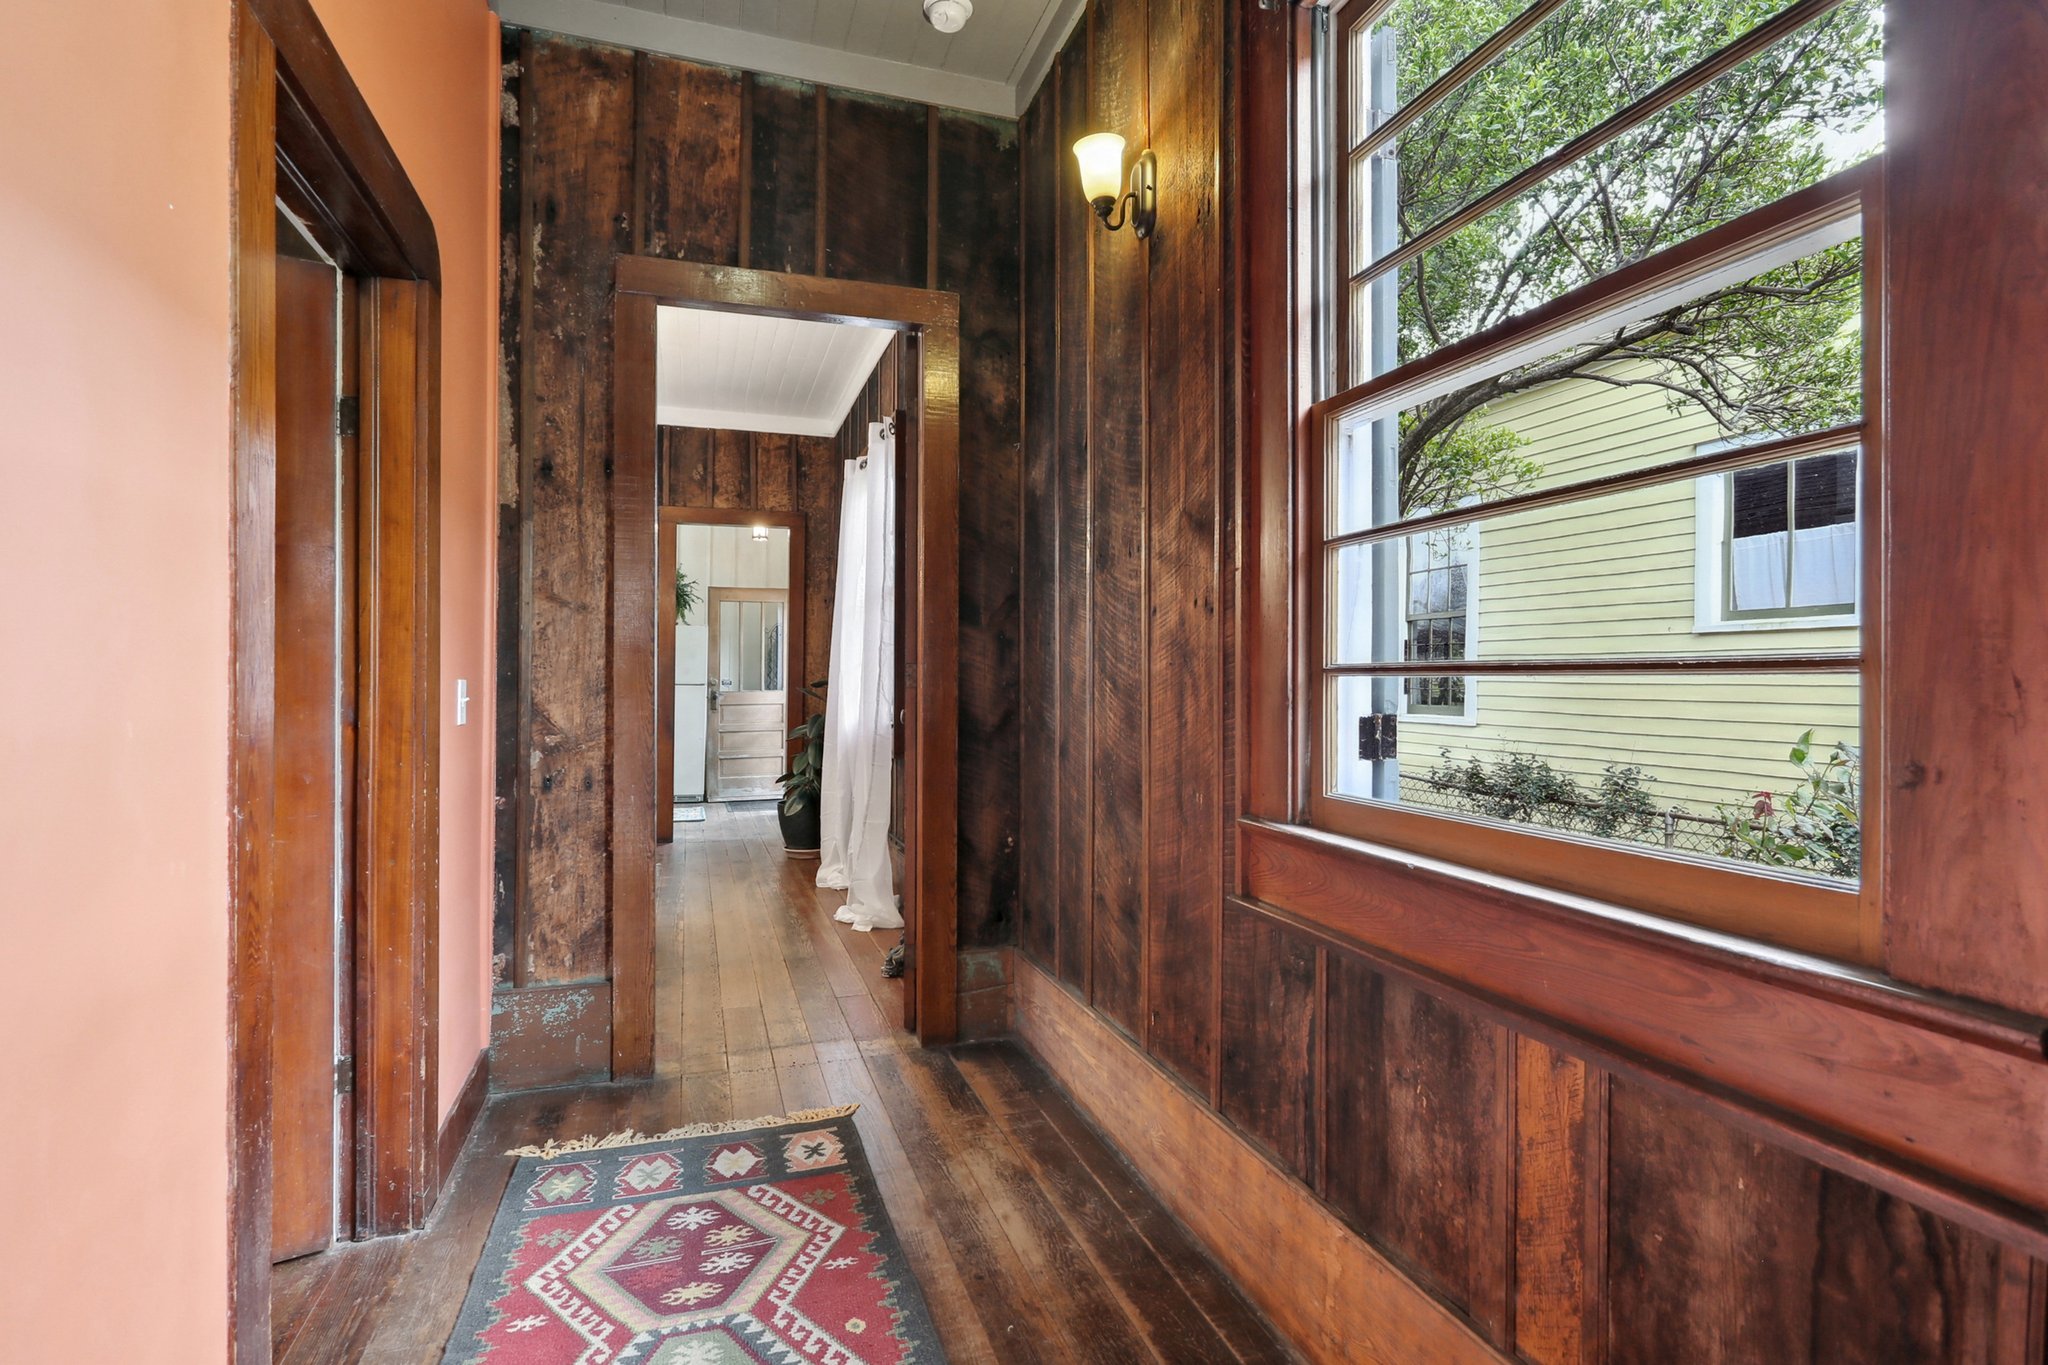 A hallway separates the two bedrooms, with the bathroom situated off of the hallway. The walls illustrate the historic barge board construction of the home.